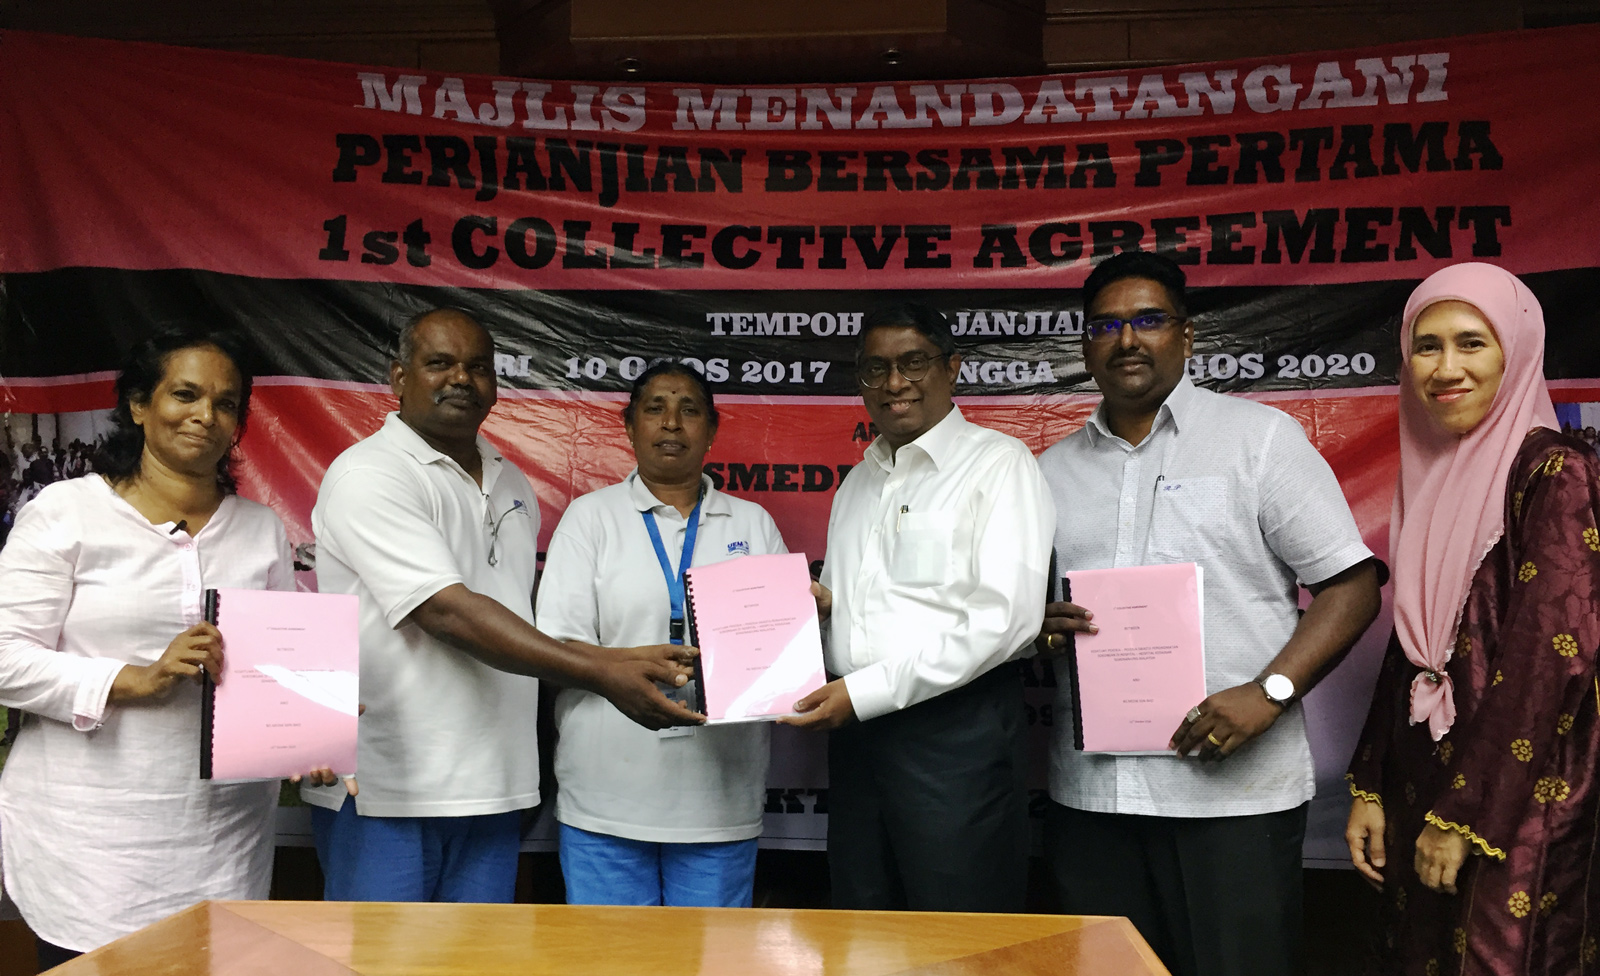 NUWHSAS members (Saras on the far left) and NS Medik representatives meet in Ipoh to sign their first collective agreement on 23 October 2019.